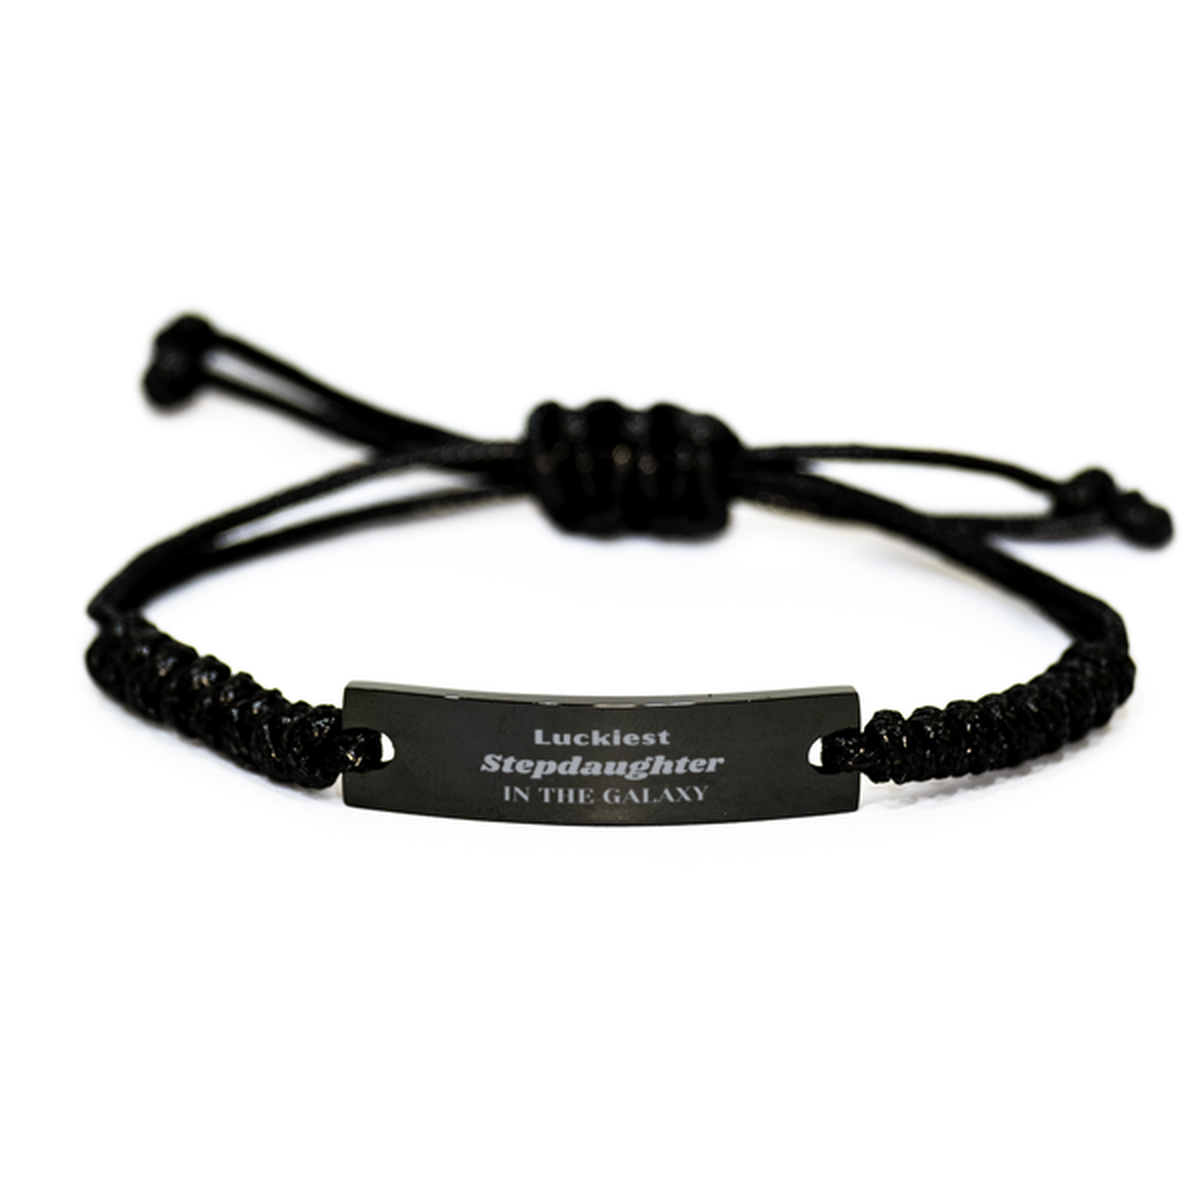 Luckiest Stepdaughter in the Galaxy, To My Stepdaughter Engraved Gifts, Christmas Stepdaughter Black Rope Bracelet Gifts, X-mas Birthday Unique Gifts For Stepdaughter Men Women